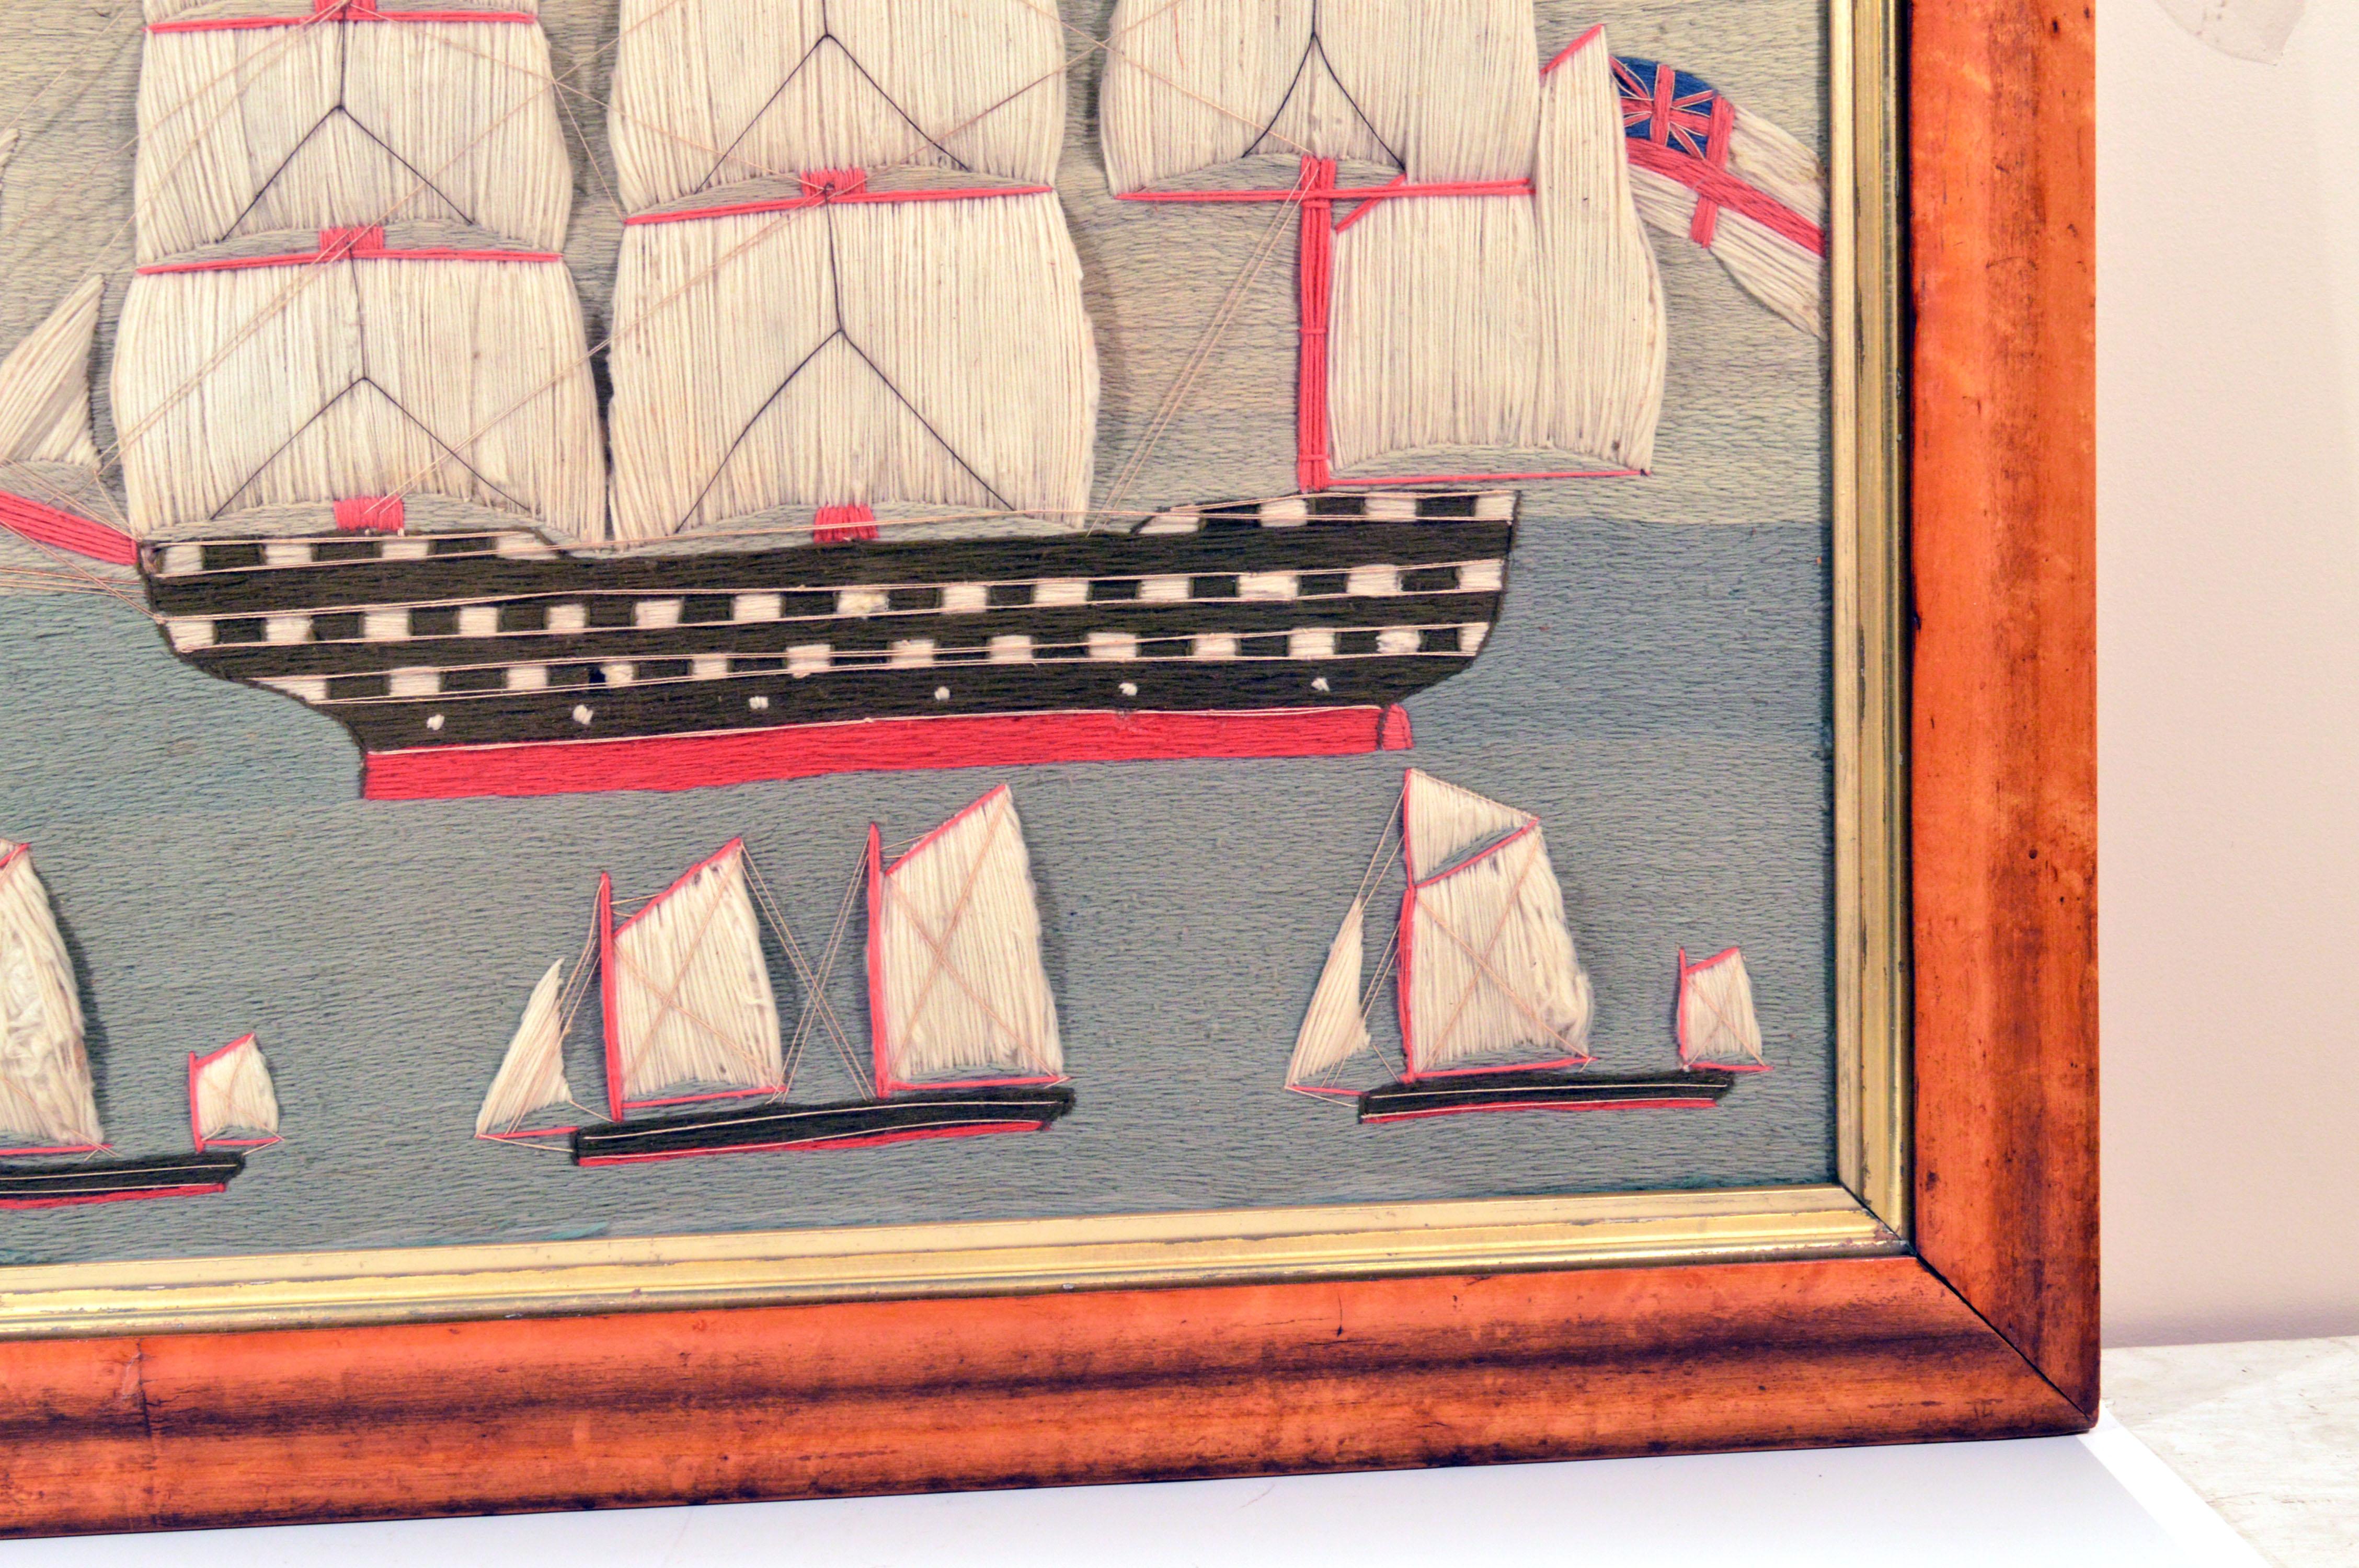 Folk Art Sailor's Woolwork With Trapunto Sails,

The large colorful folky sailor's woolwork or woolie depicts a large square-rigged three-masted first-rate battleship. The sails are depicted trapunto. The hull of the ship in orange as are the masts.